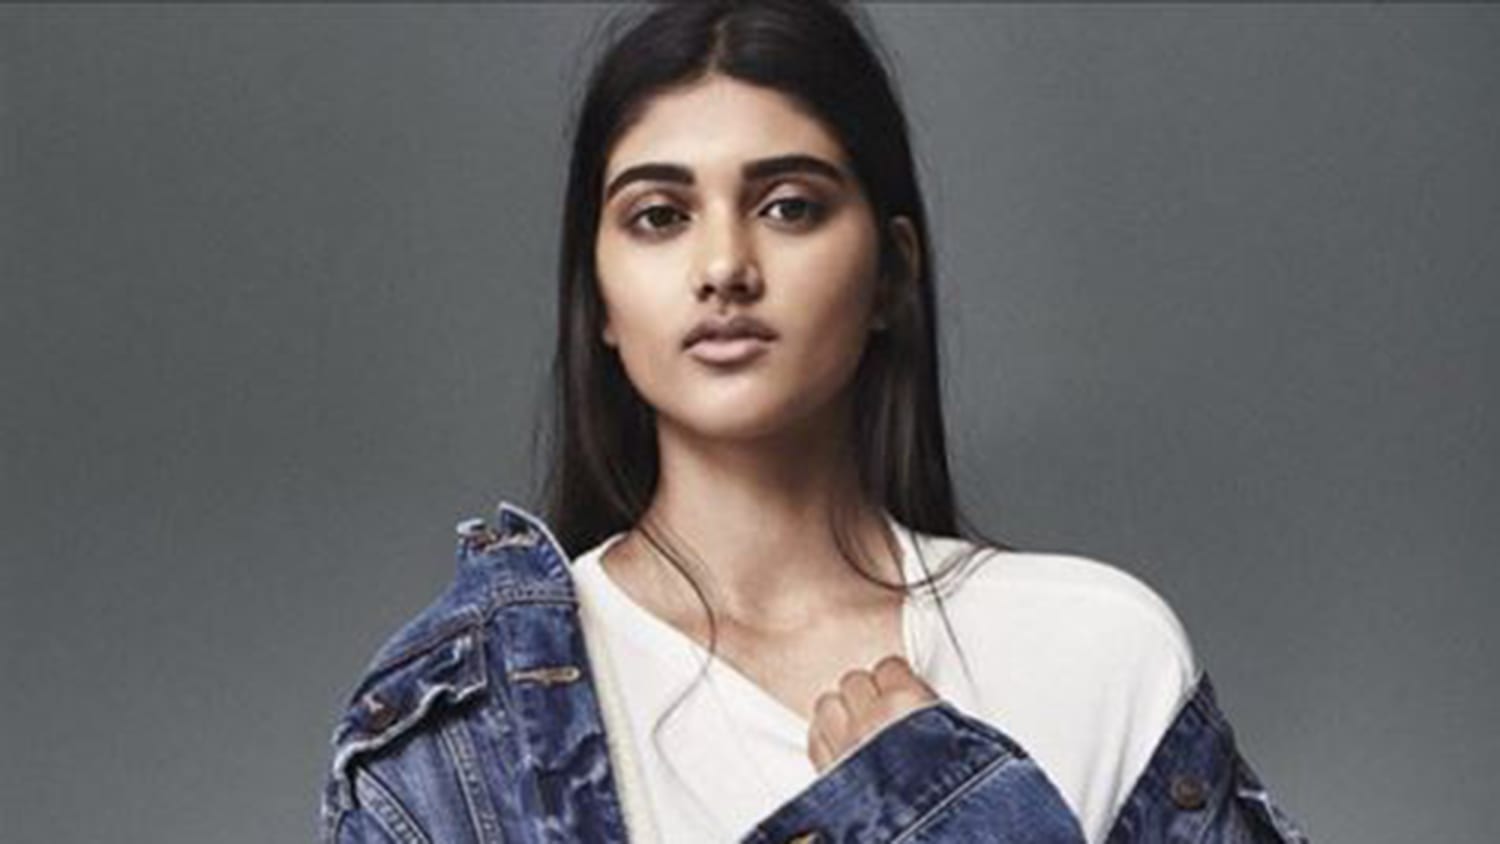 Indian model Neelam Gill is new face of Abercrombie & Fitch